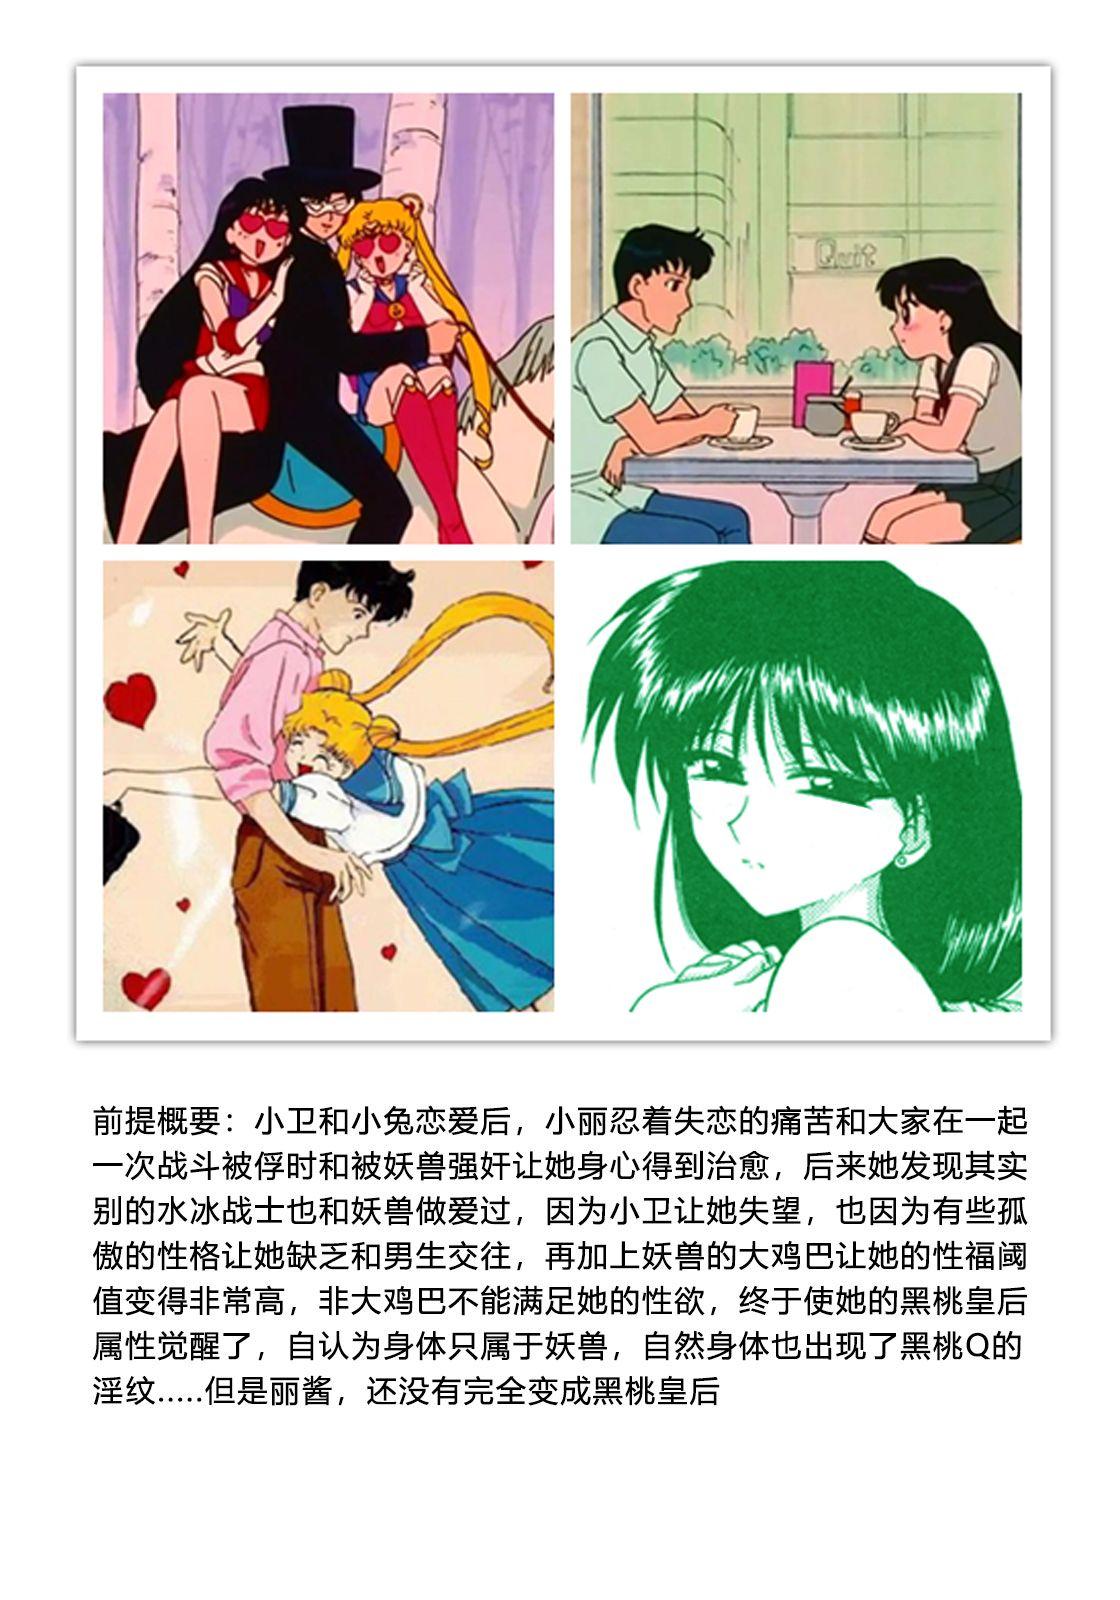 Beauty QUEEN OF SPADES - 黑桃皇后 - Sailor moon Huge Tits - Page 12